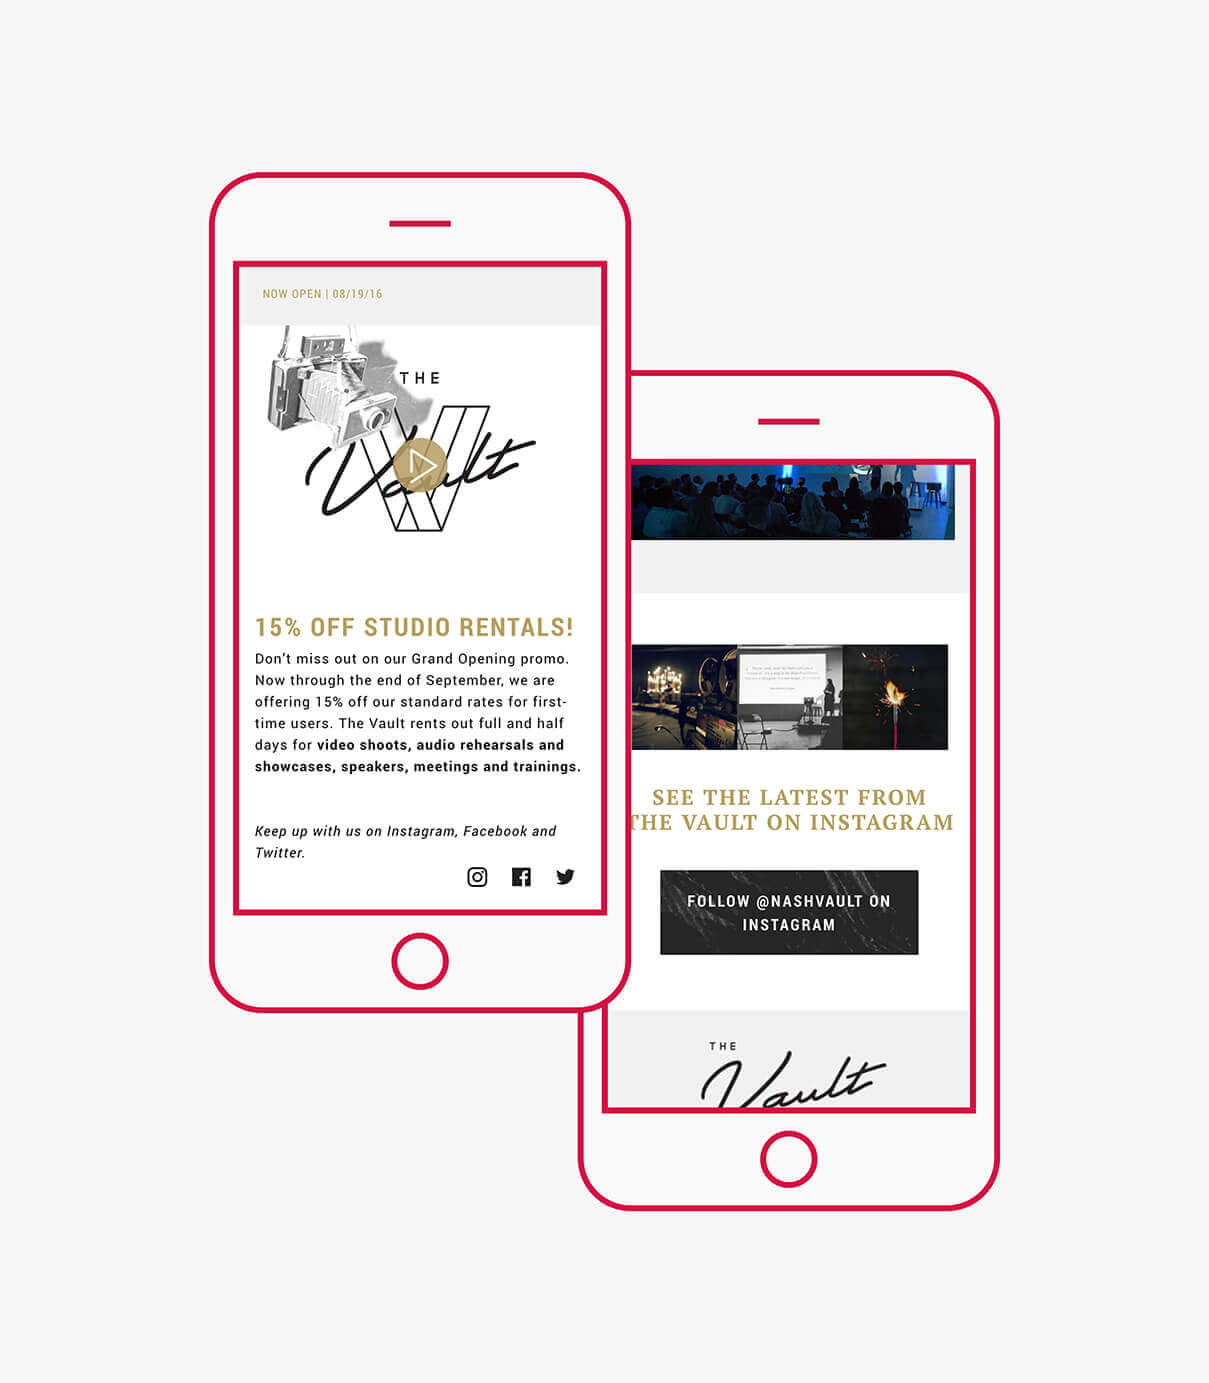 Promotional email campaign for The Vault featured on mobile device